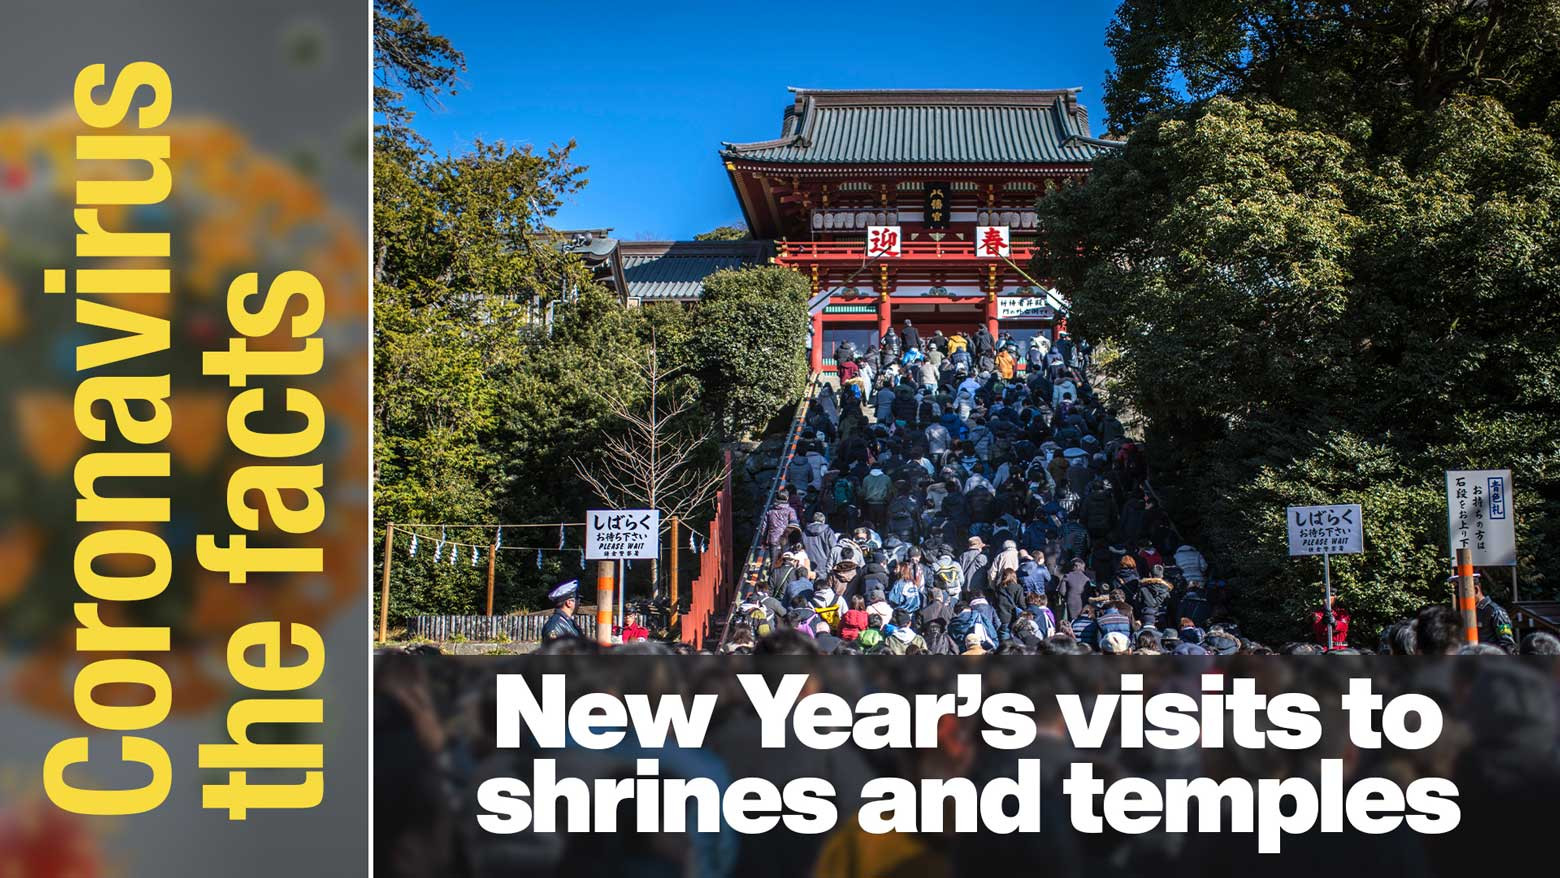 What to be careful of when visiting shrines and temples at New Year's